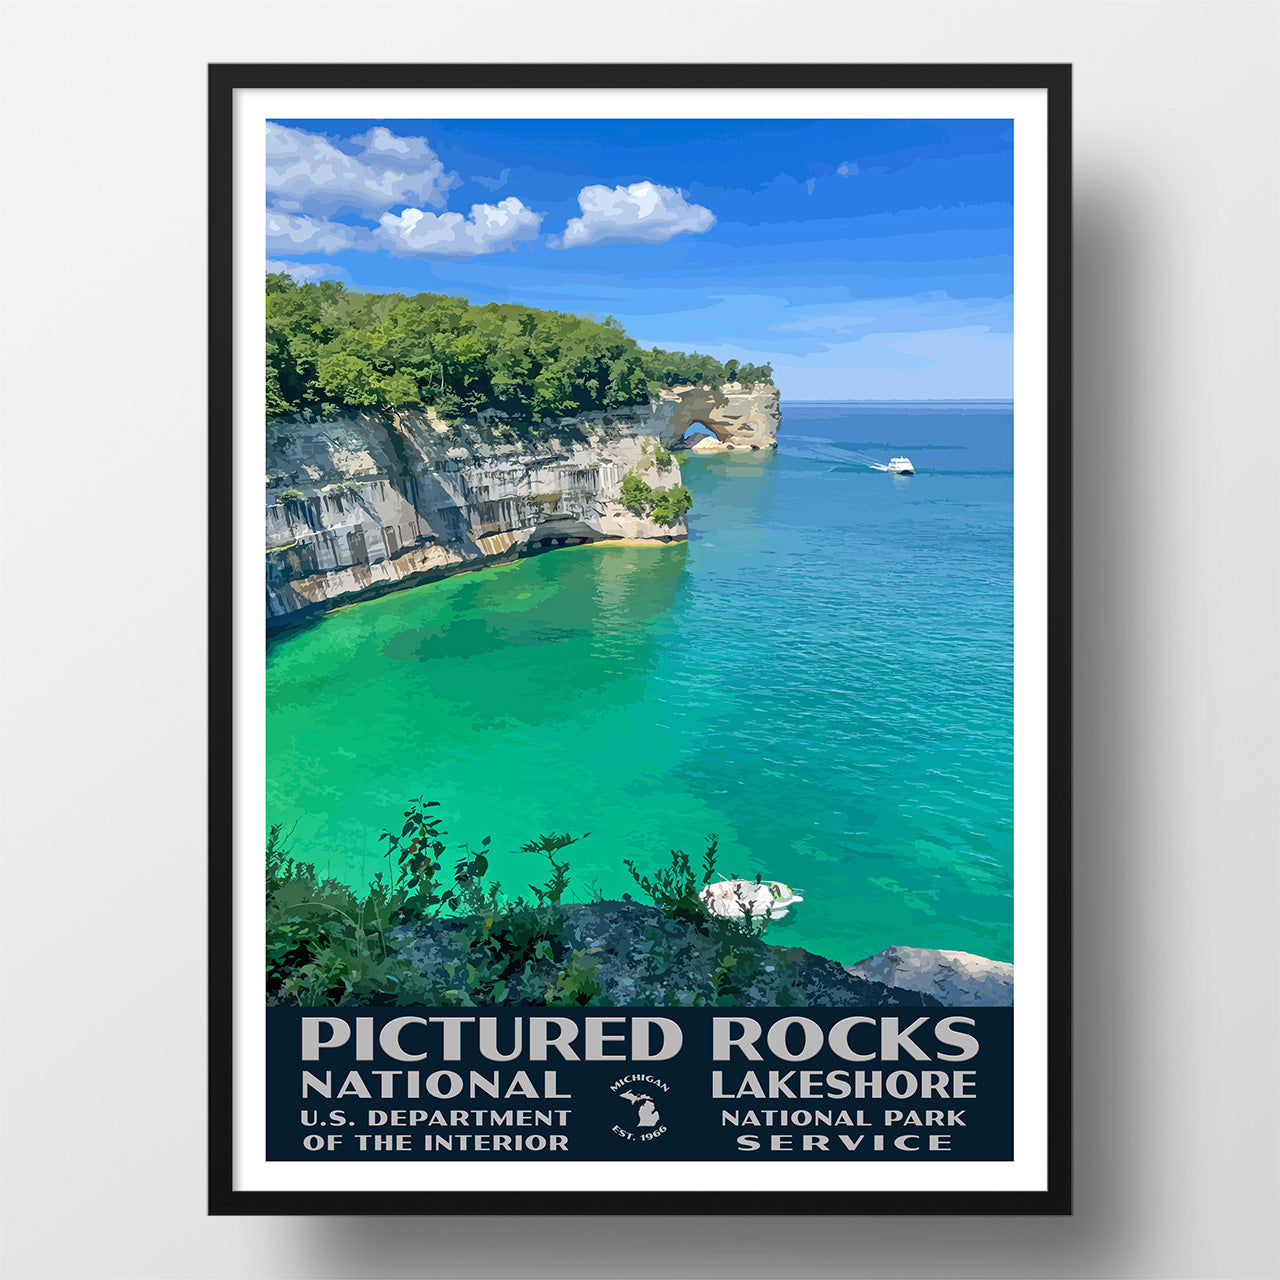 Pictured Rocks National Lakeshore Poster-WPA (Grand Portal Point)